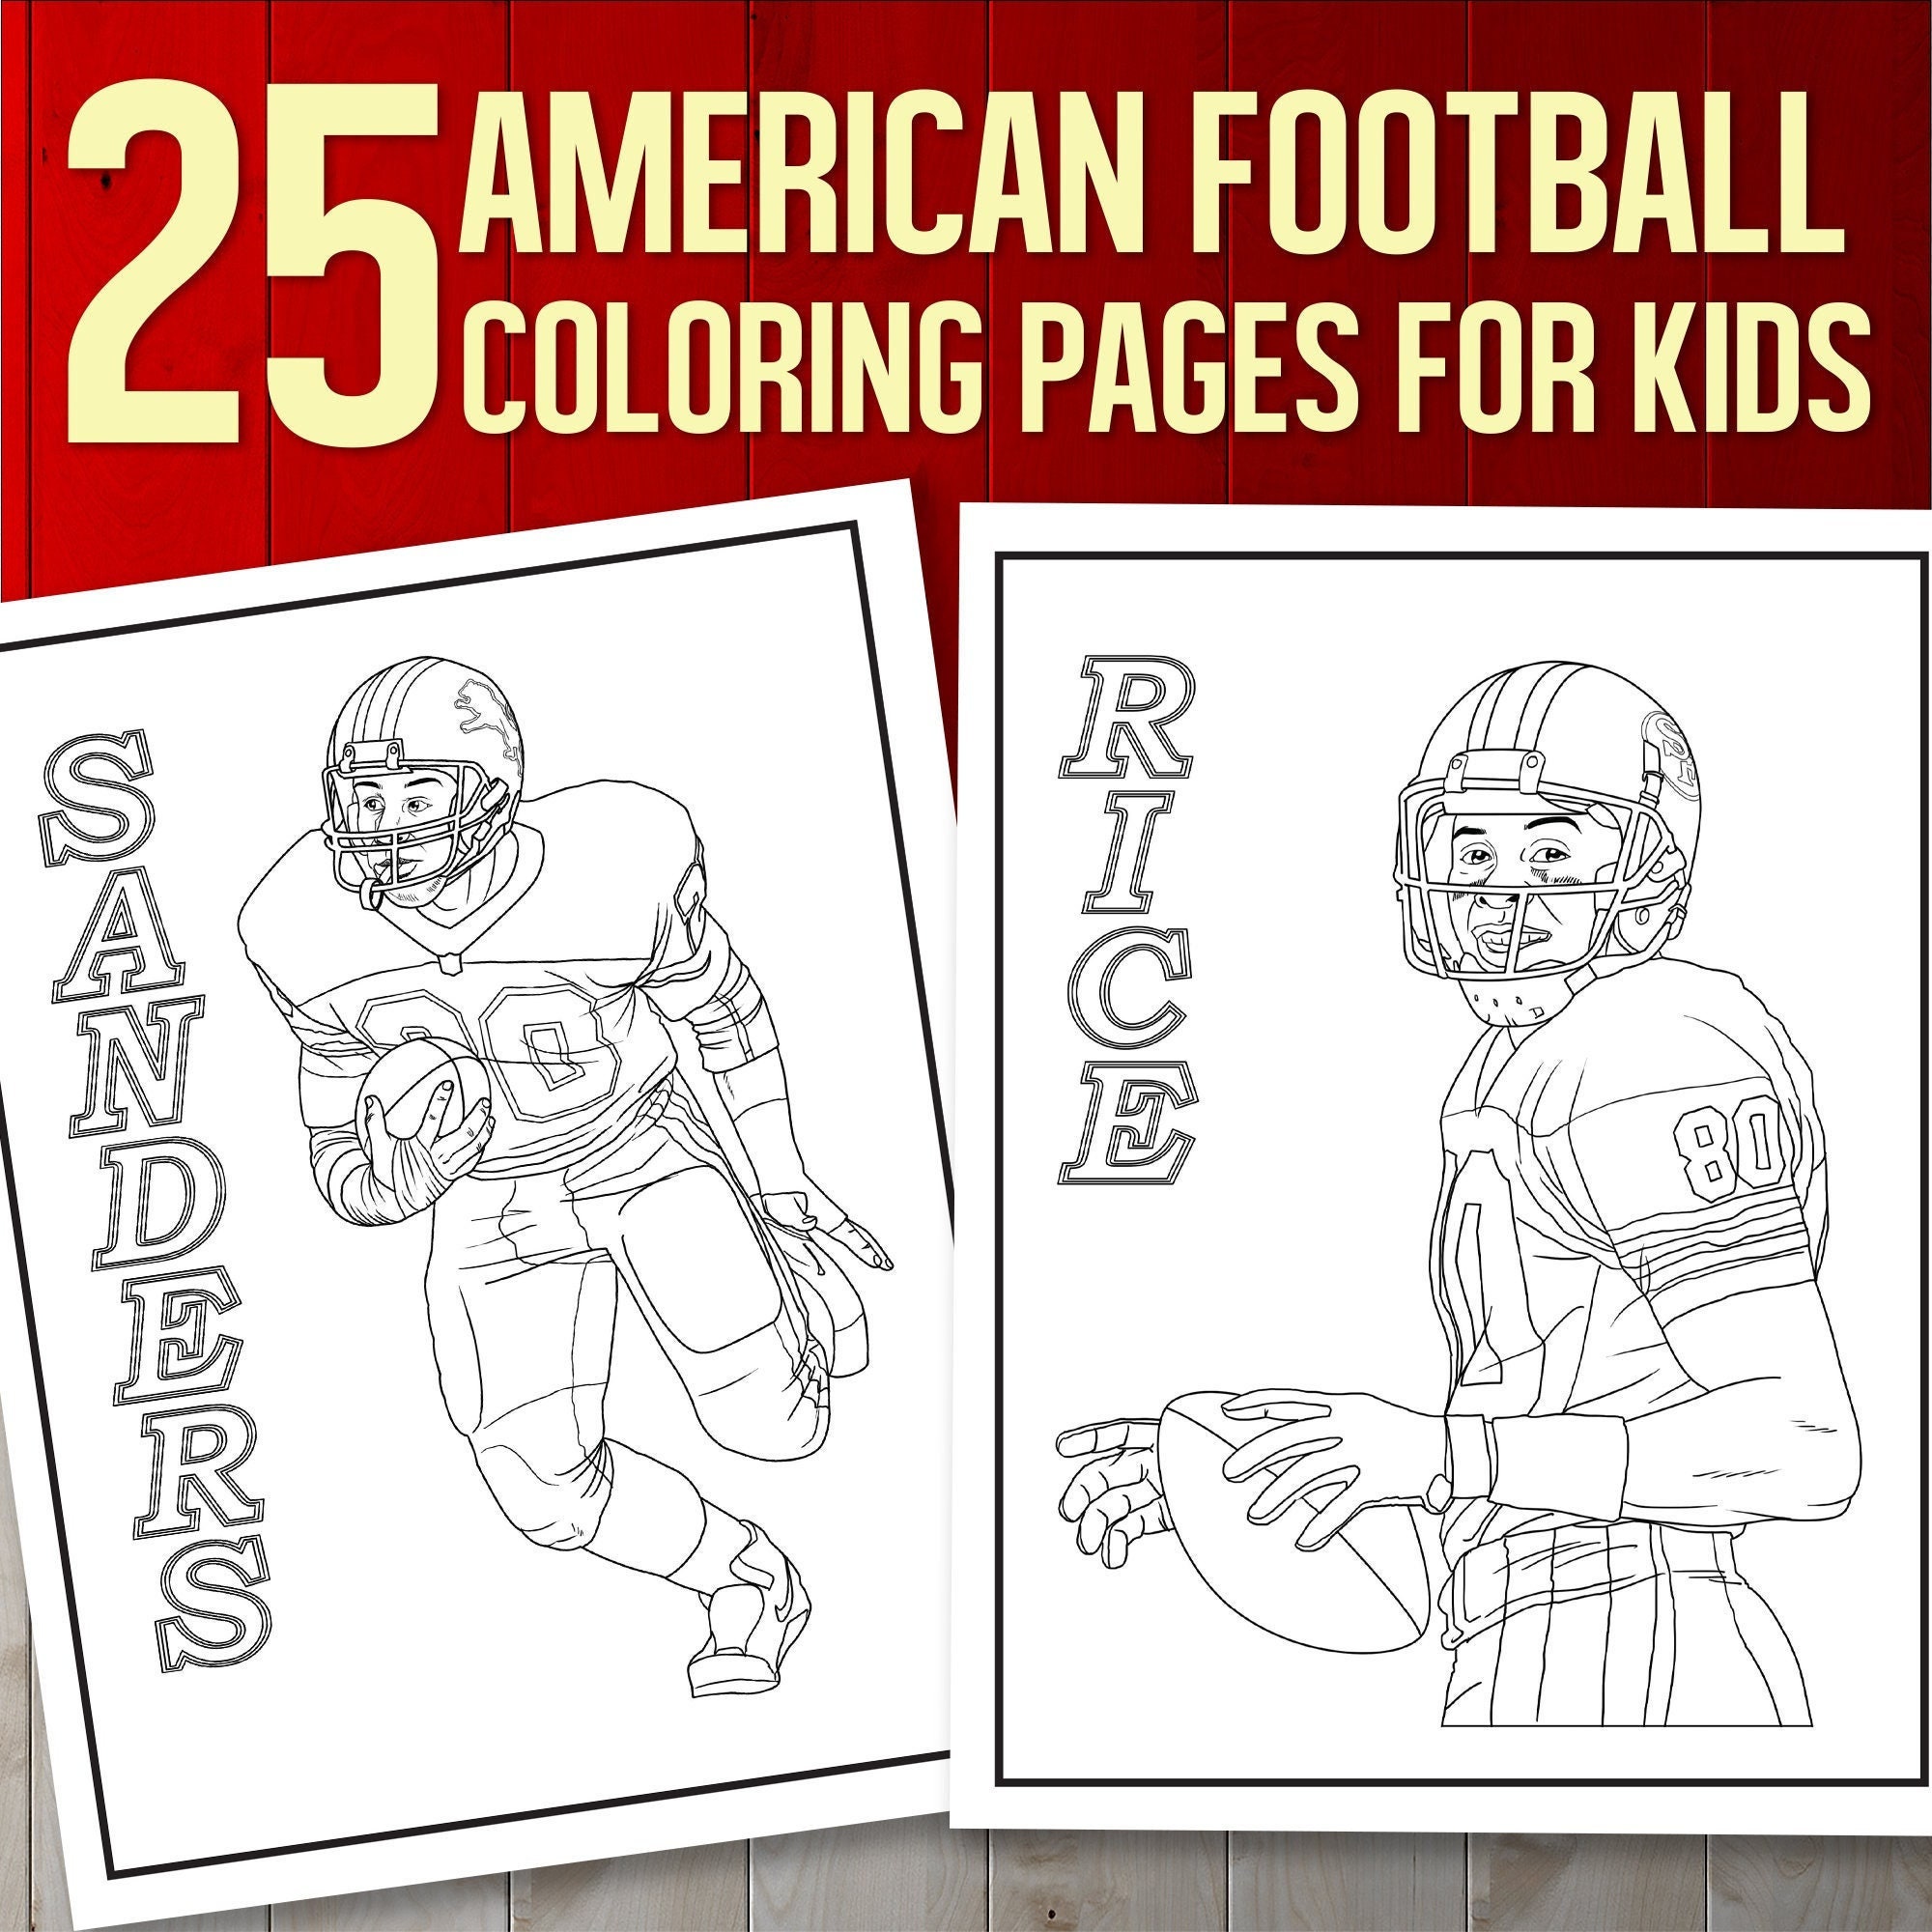 Best value football fans coloring book instant download sports coloring pages perfect gift for ultimate nfl fans football players